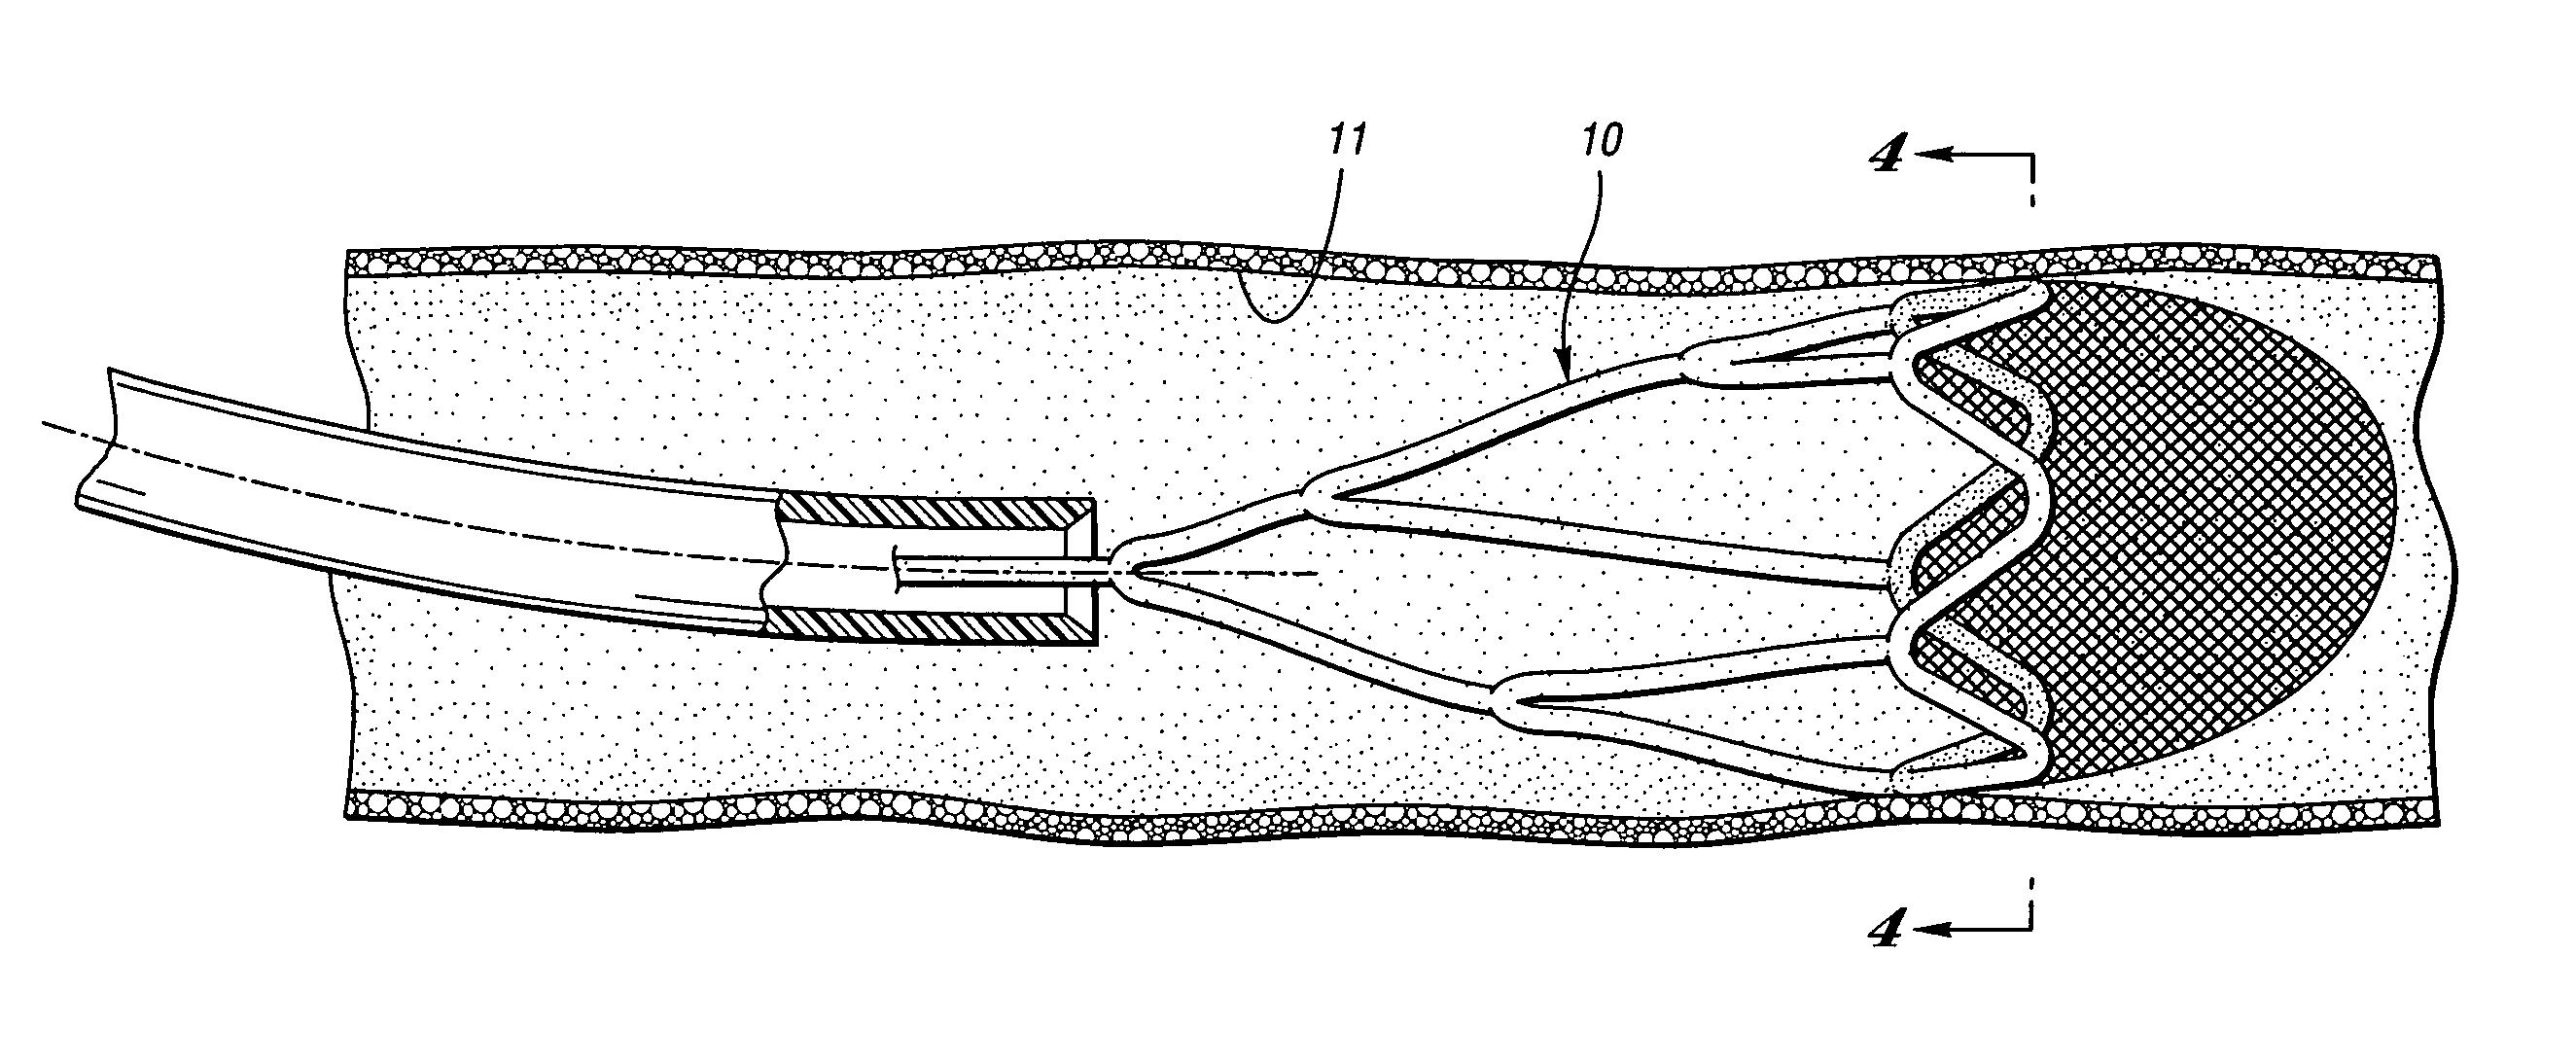 Embolic protection device having a reticulated body with staggered struts